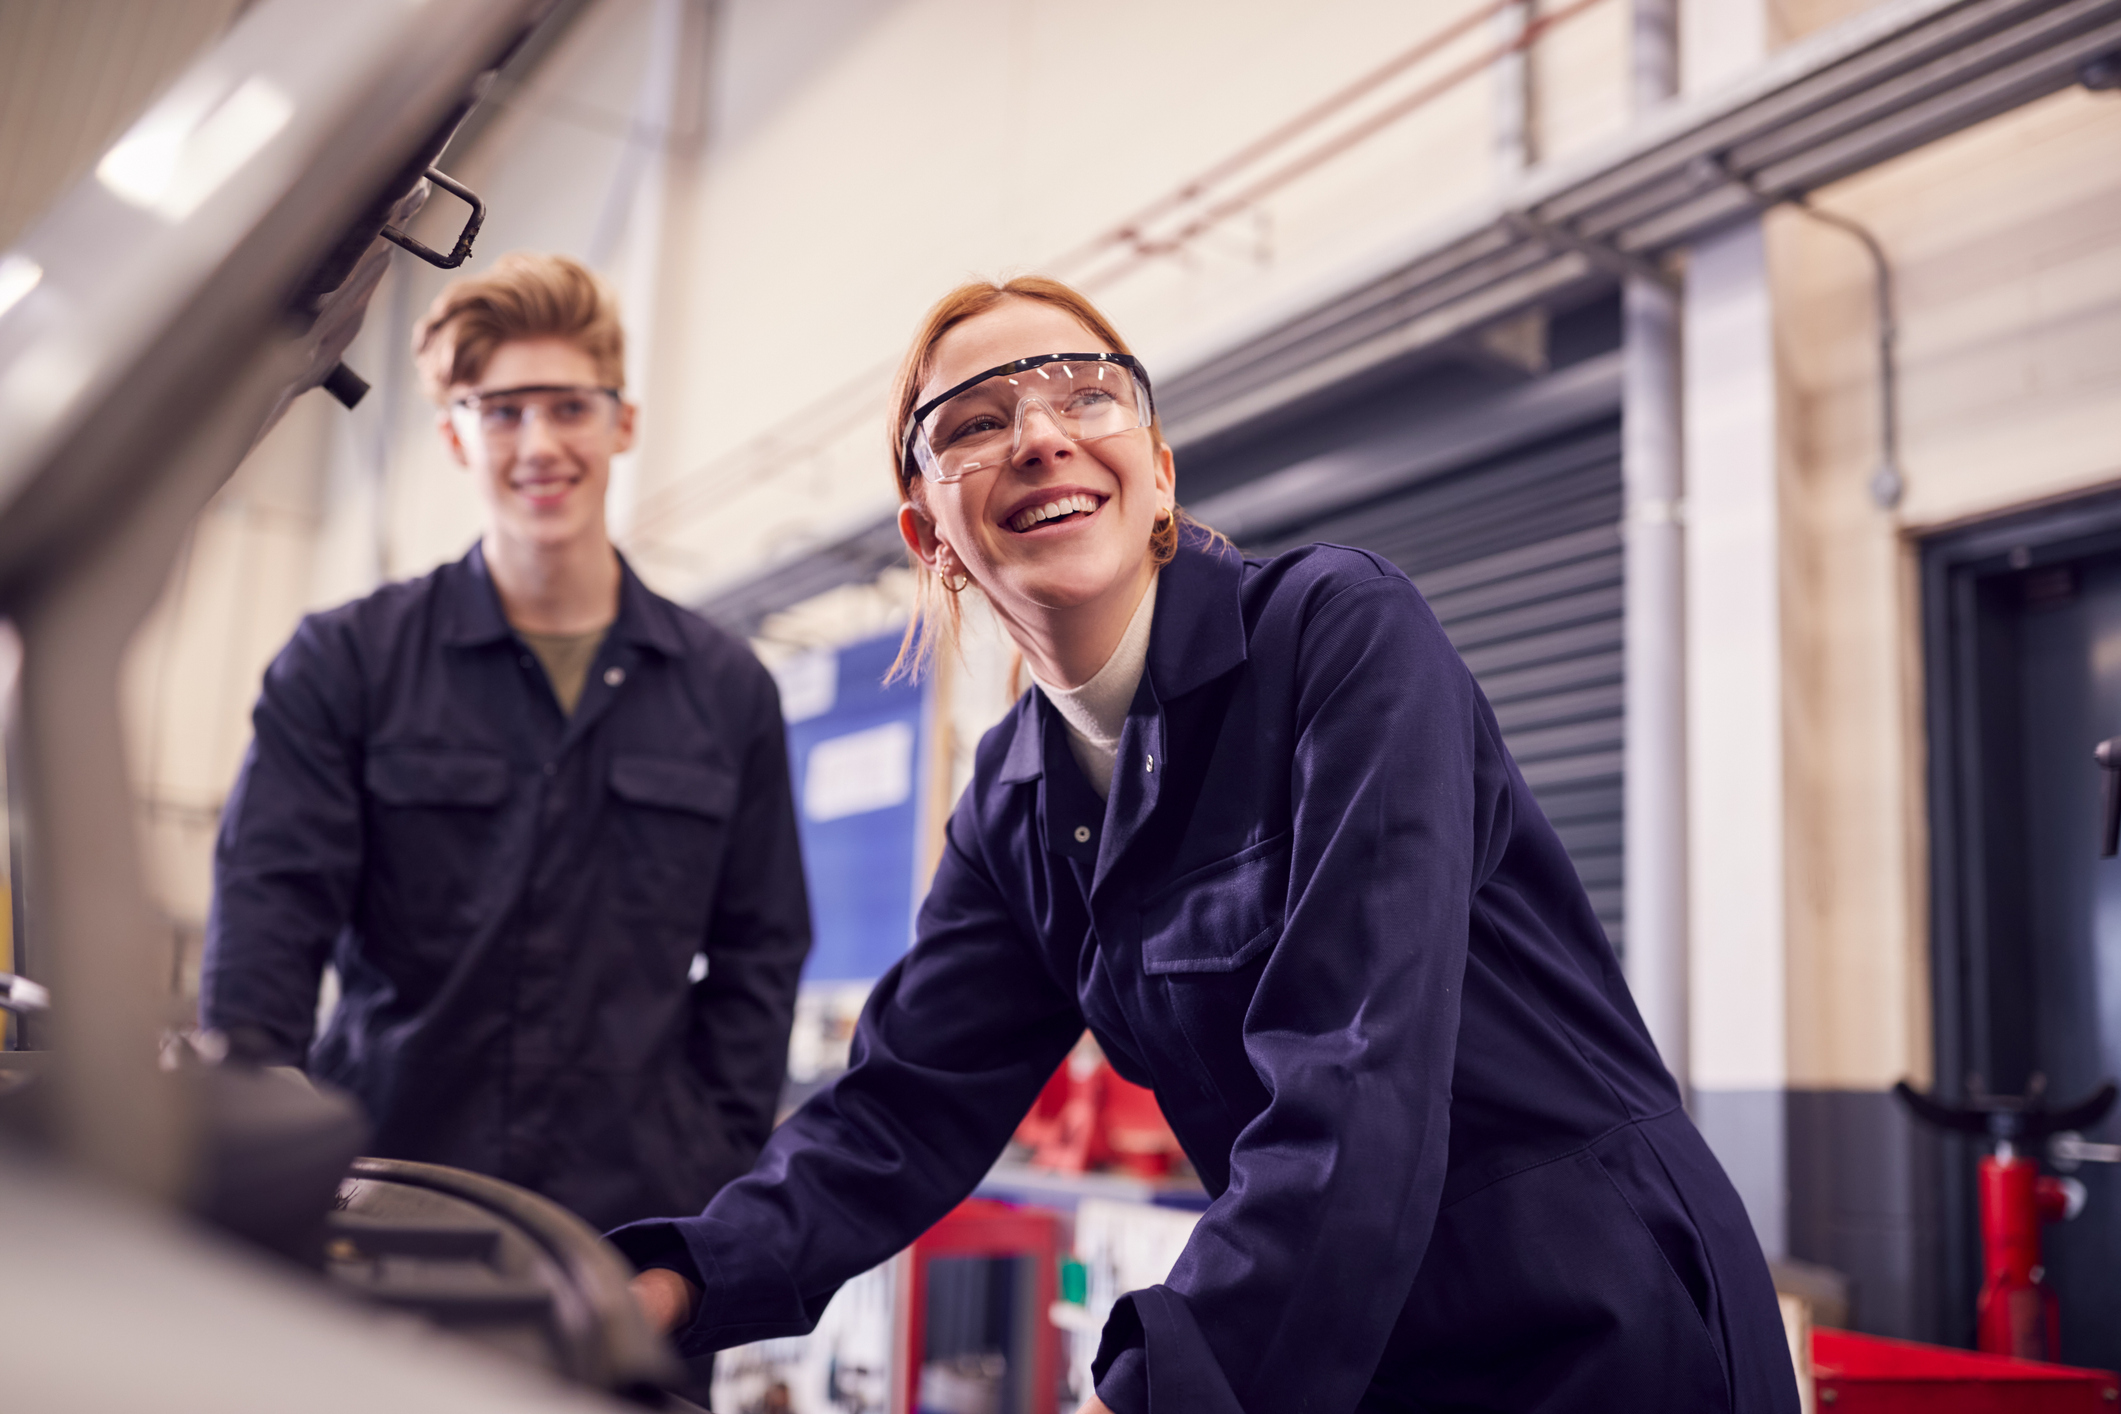 Two young adult mechanics standing in a workshop